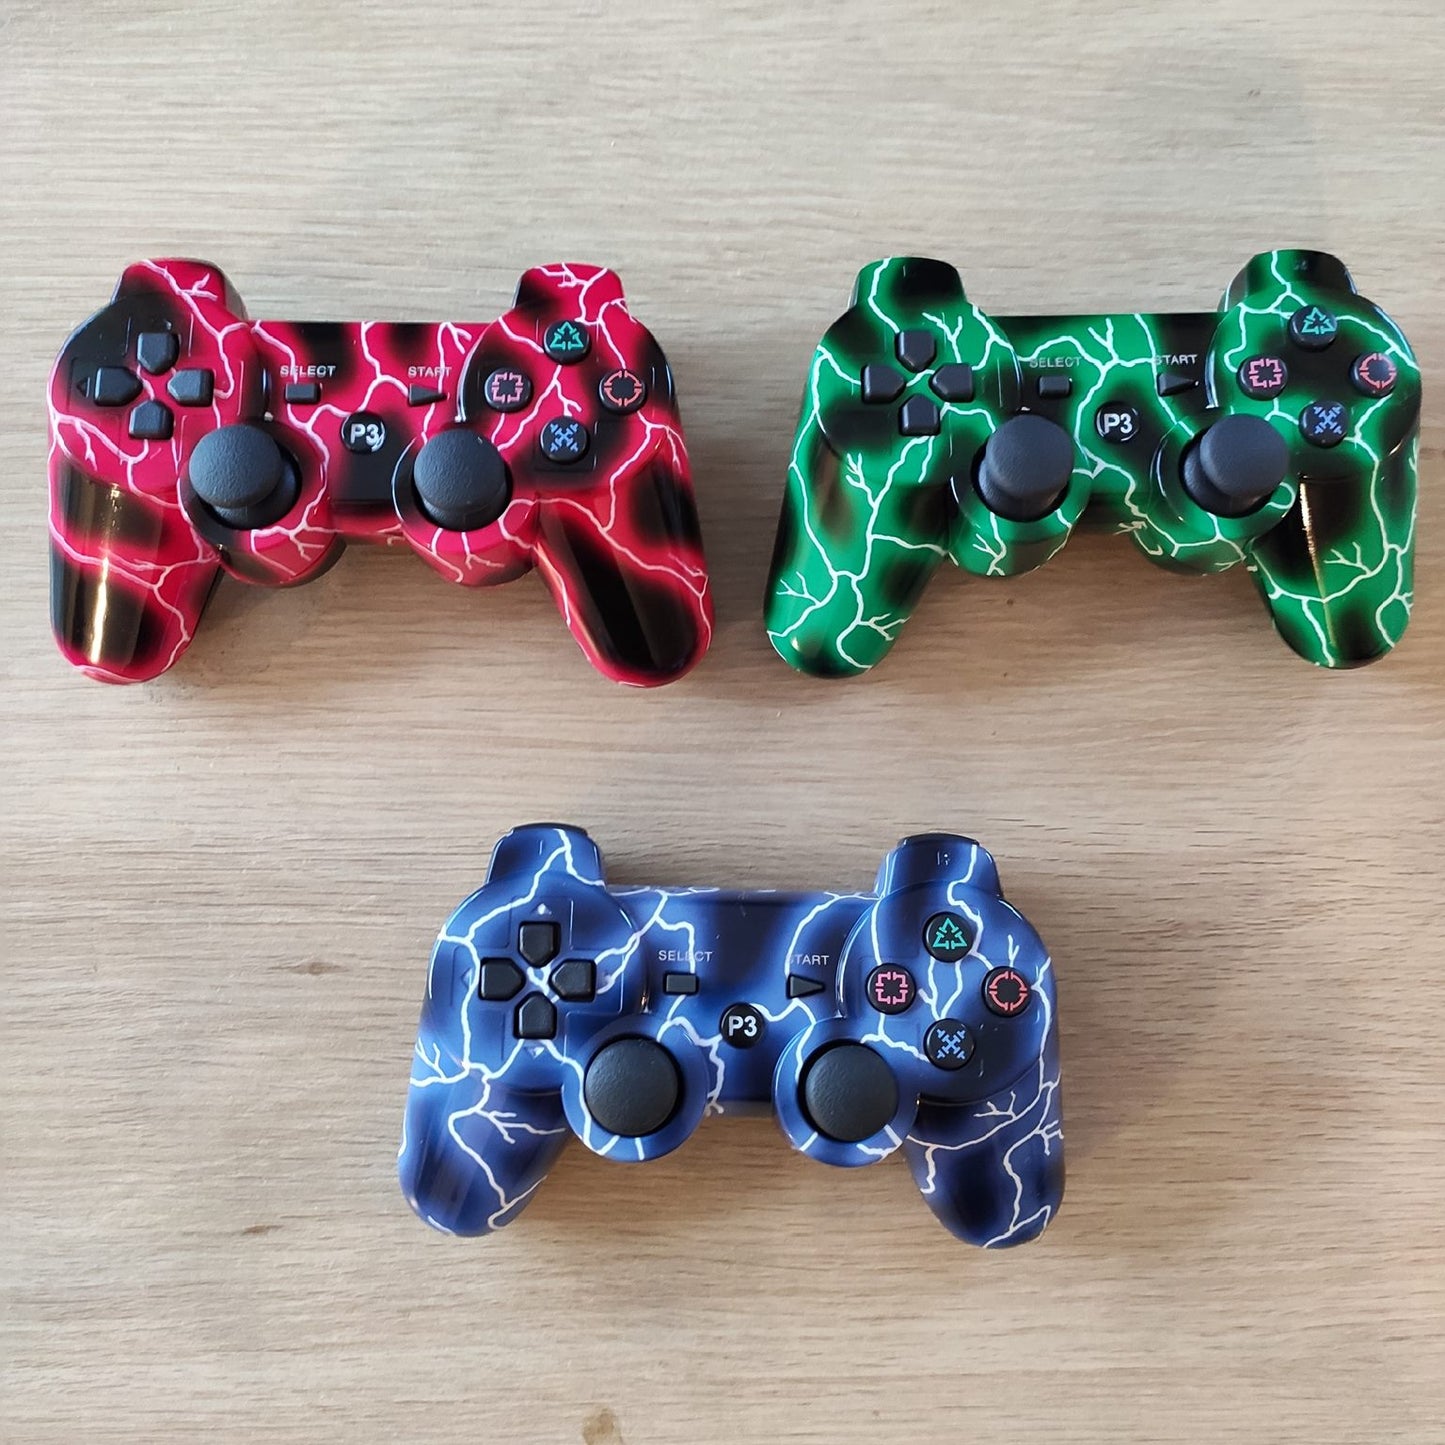 Lighting PlayStation 3 Controllers